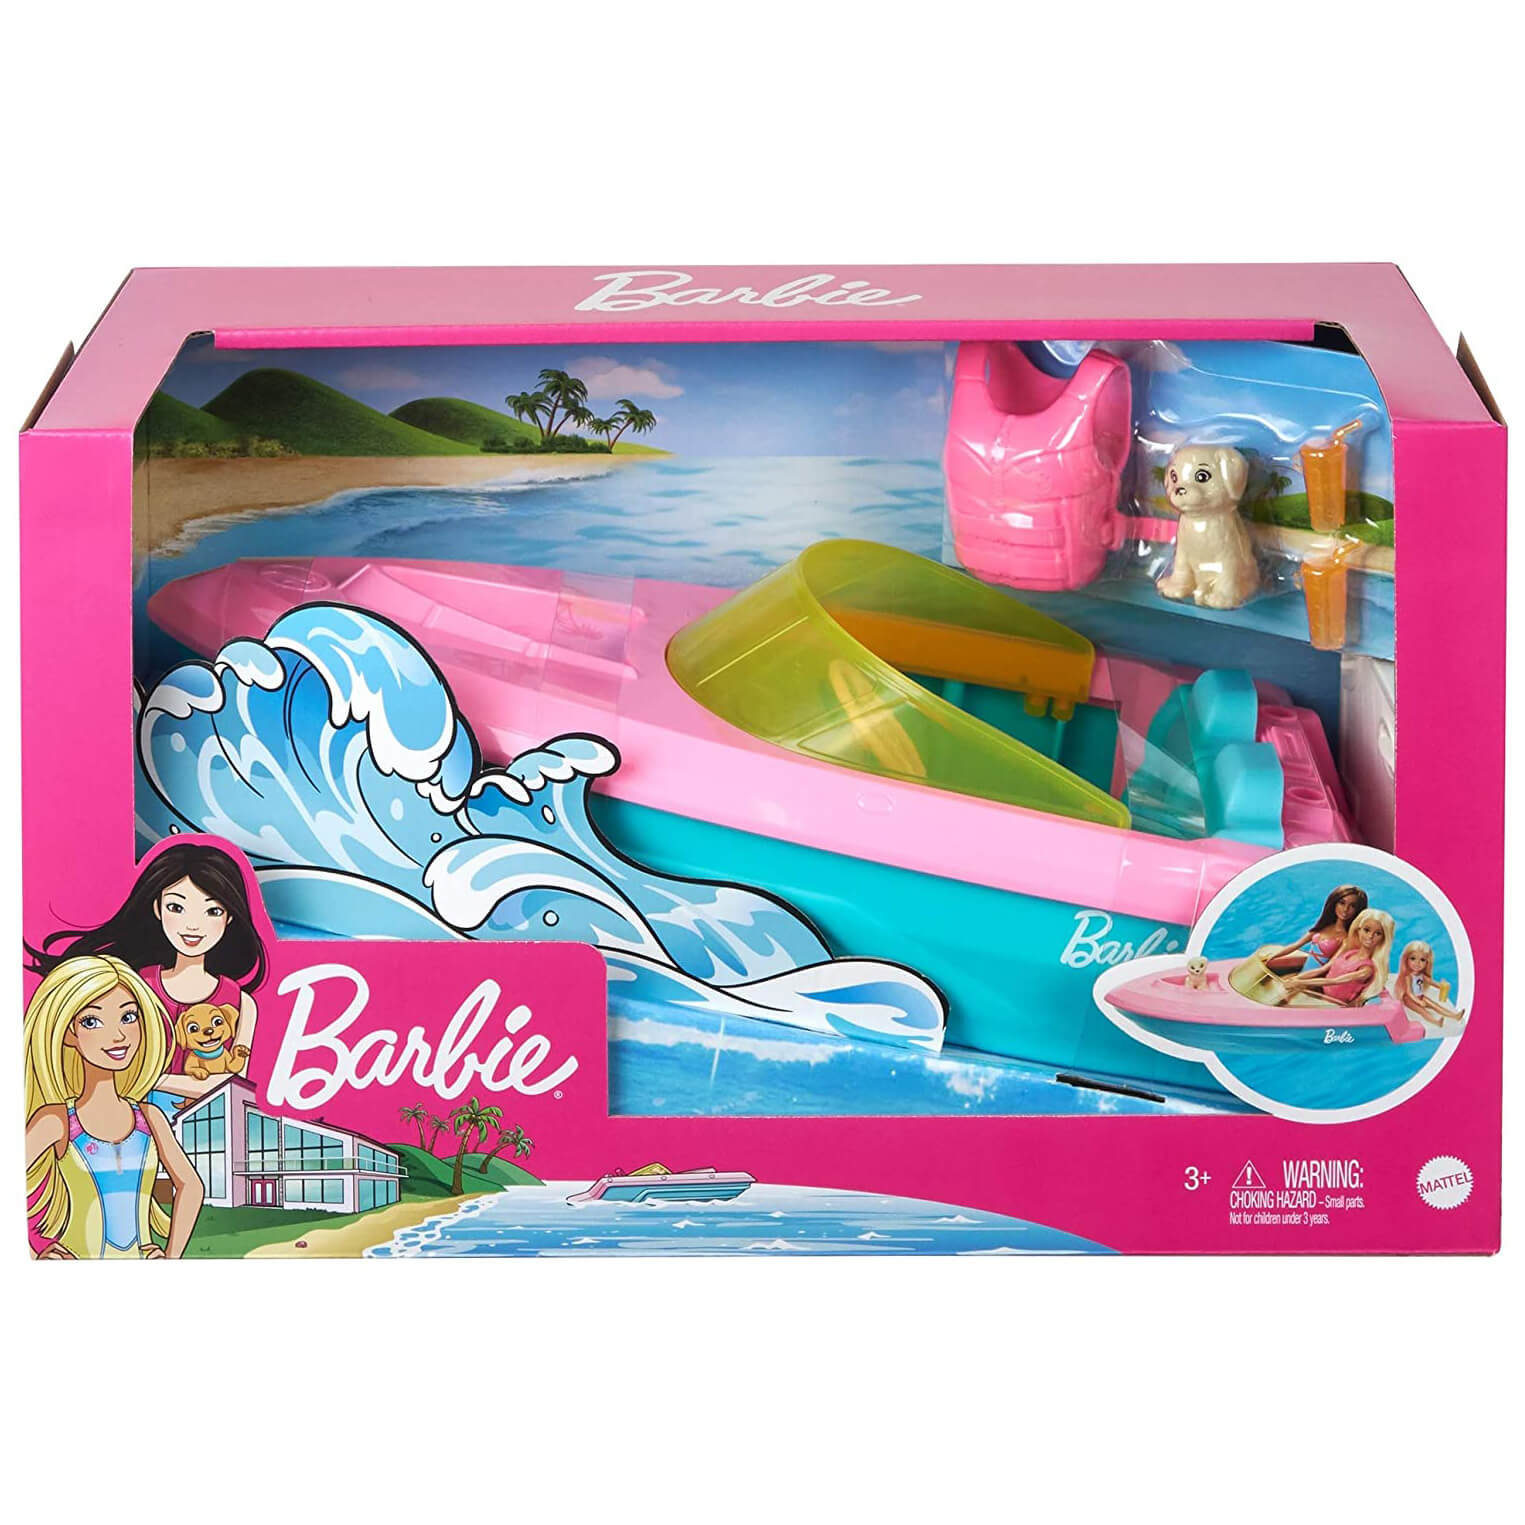 Mattel Barbie Boat with Puppy and Accessories, Fits 3 Dolls, Floats in Water